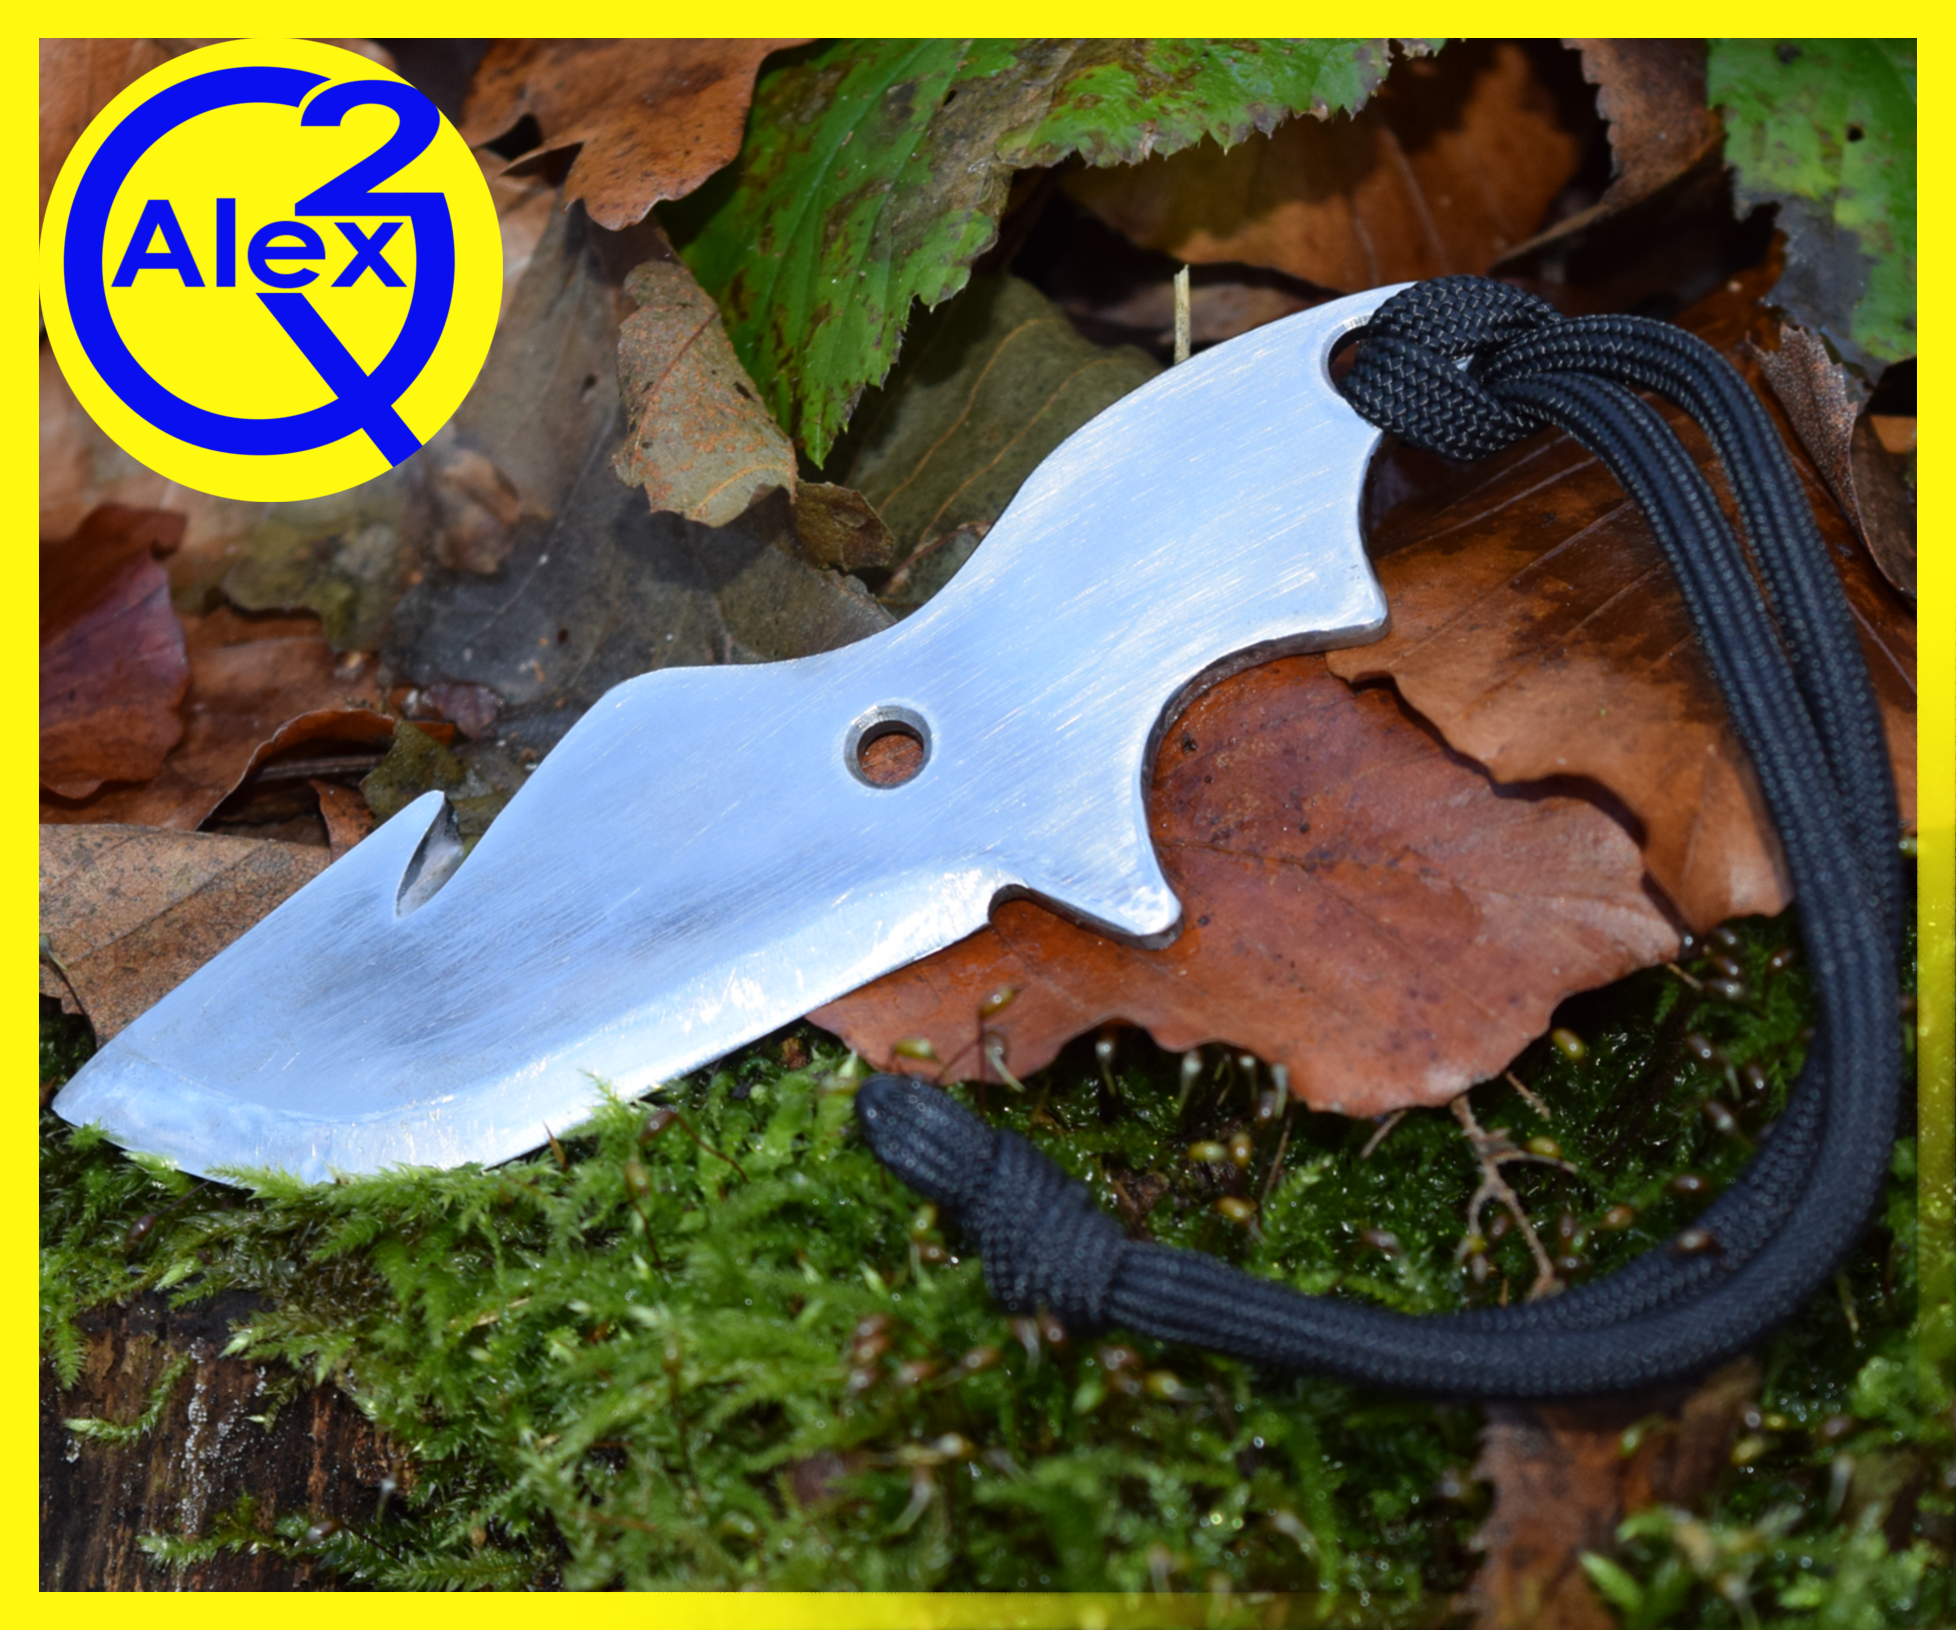 Making a Mini Survival Knife from an Old Saw Blade